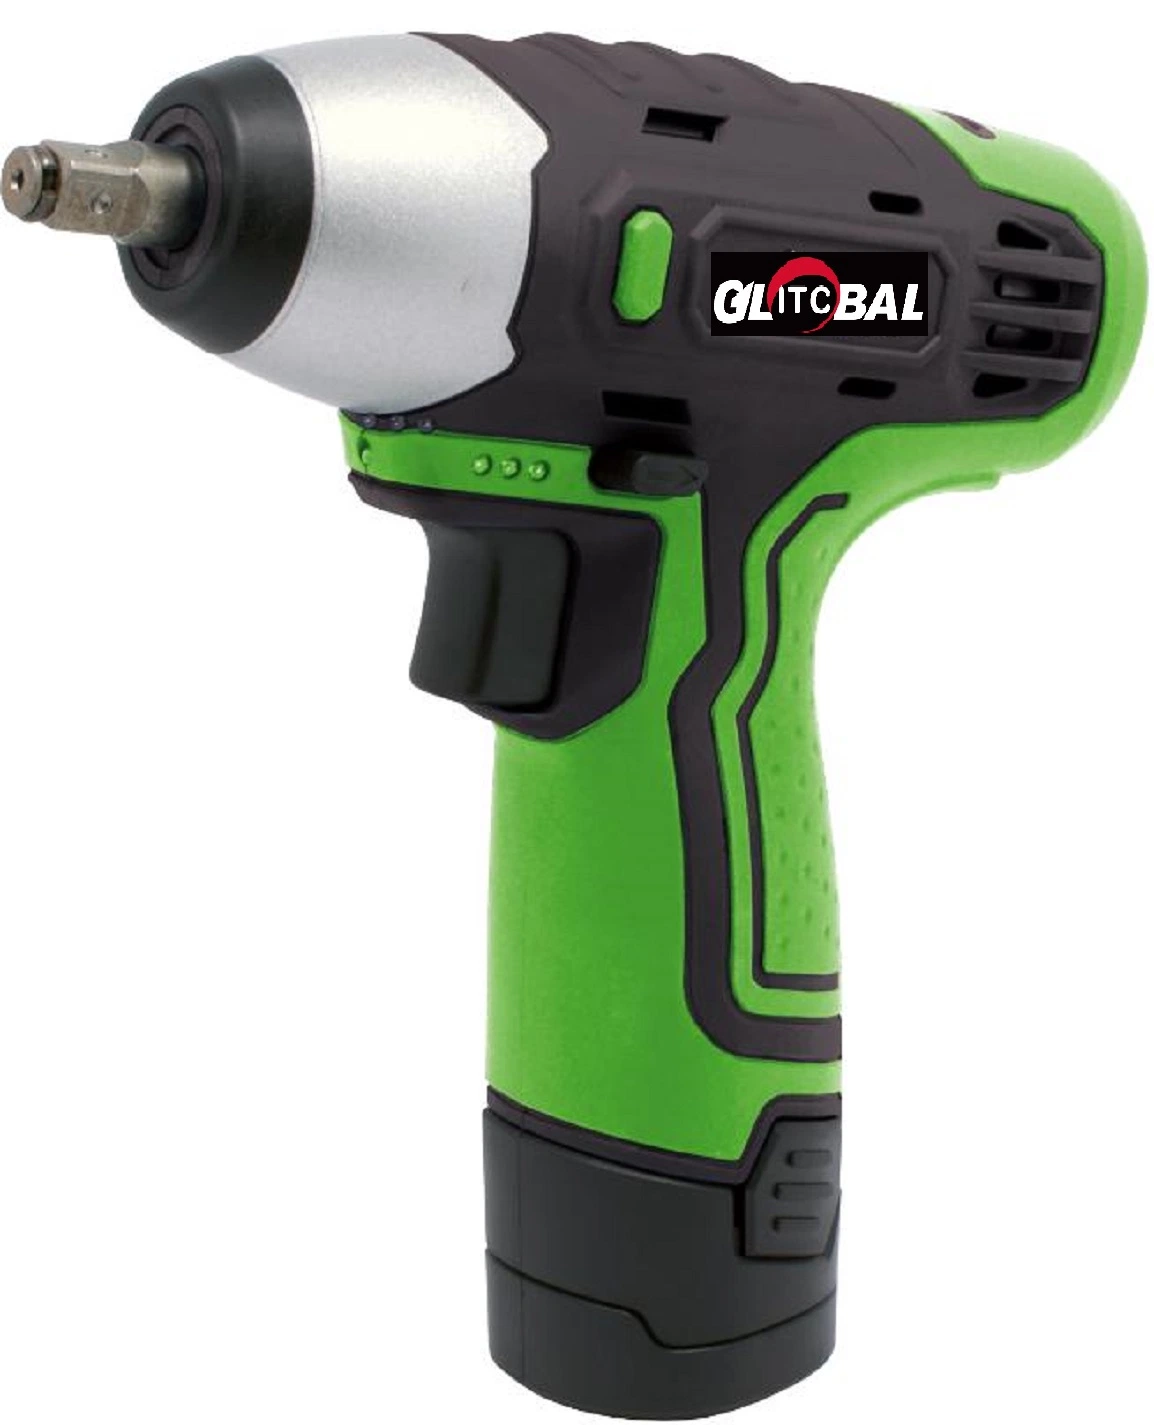 18V (20V Max) Lithium-Ion Battery Cordless/Electric Impact Wrench/Screwdriver-Power Tools